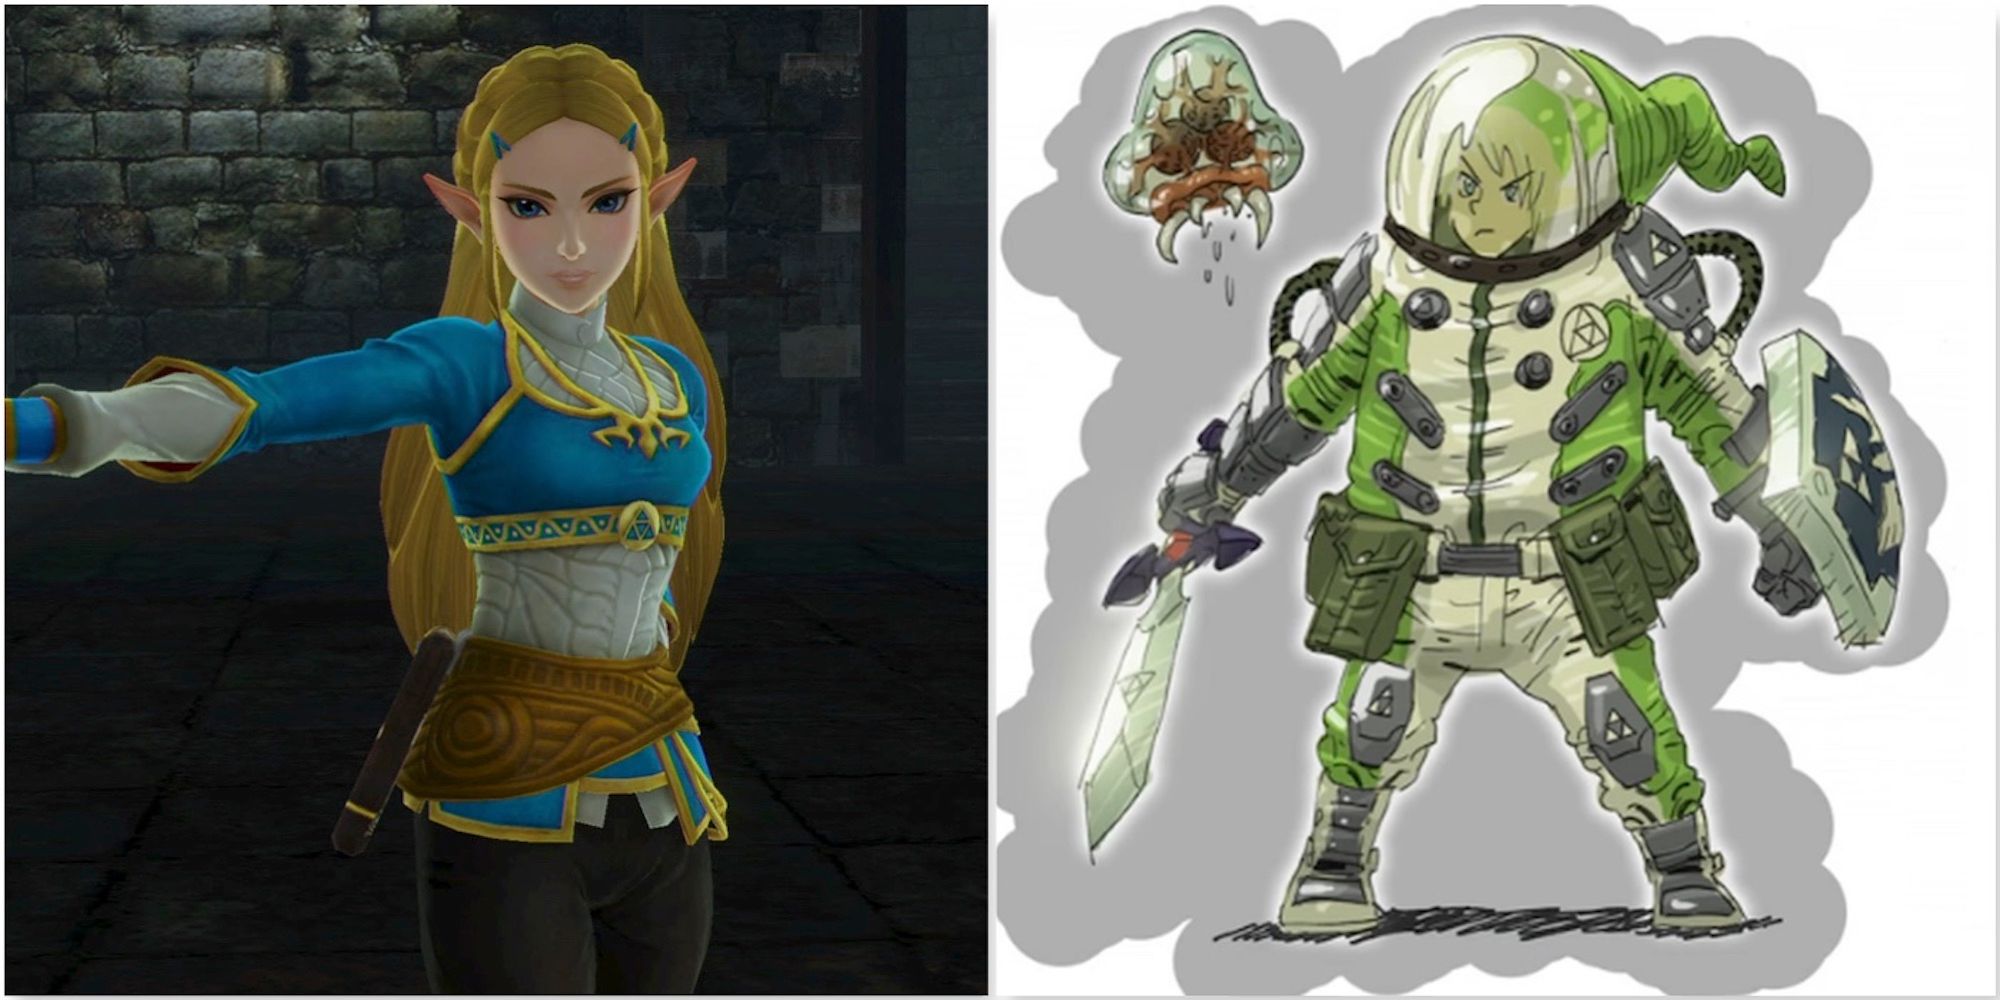 Zelda from hyrule warriors and Concept art featuring link from Breath of the Wild